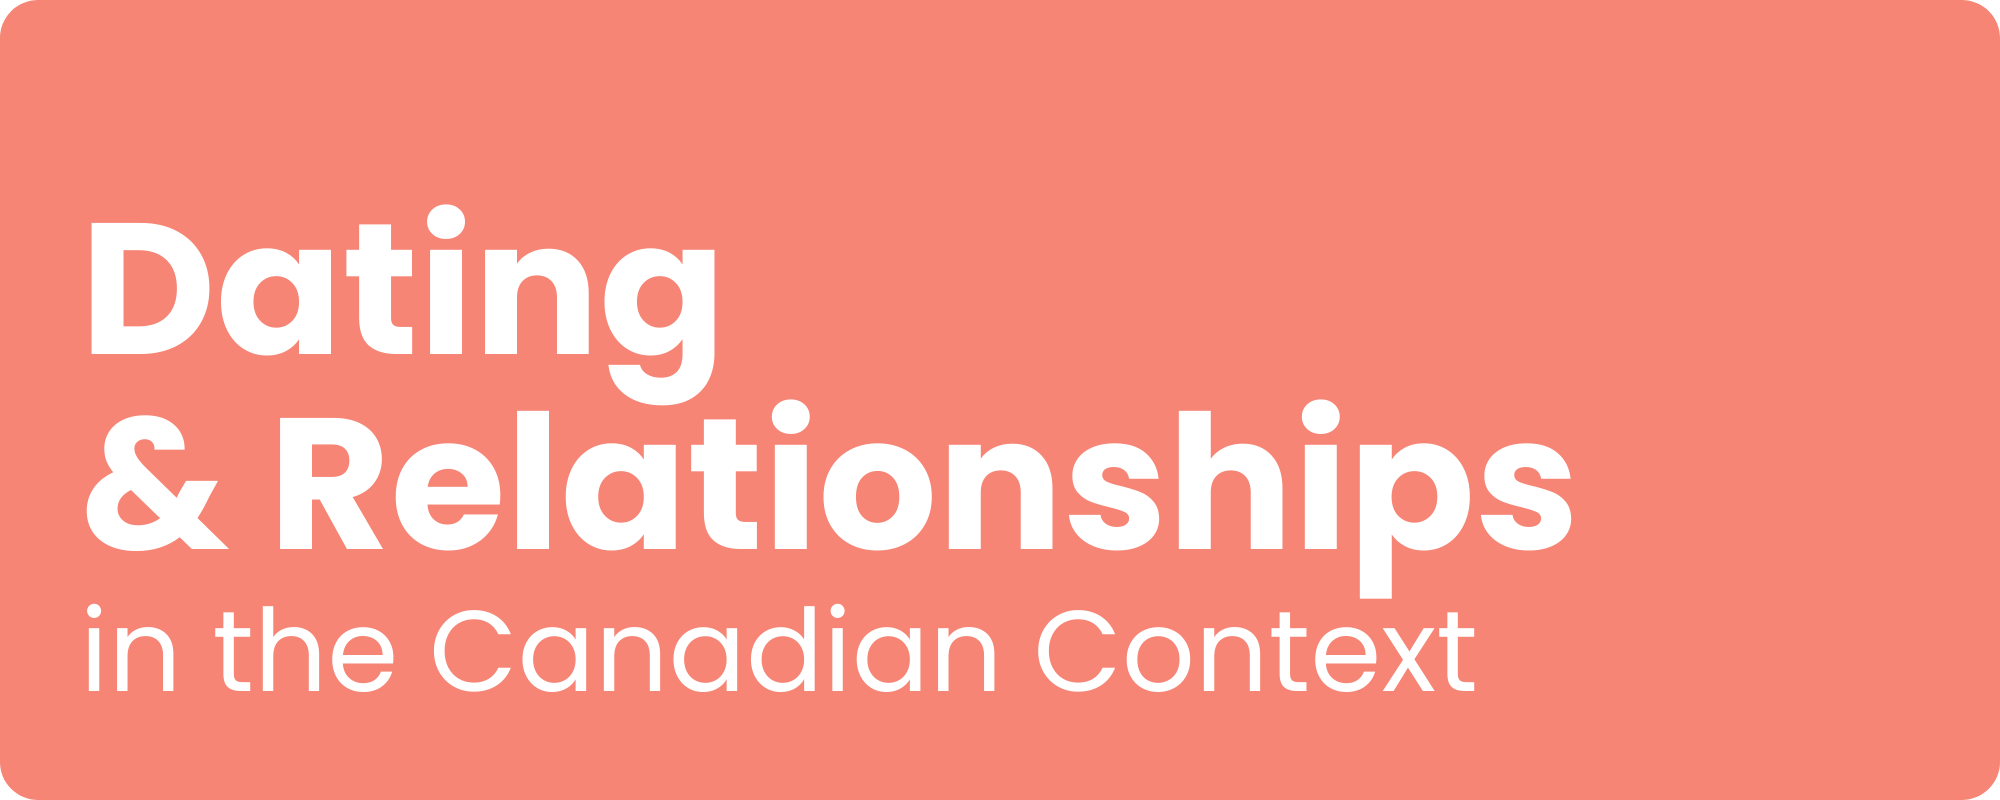 Dating & Relationships in the Canadian Context